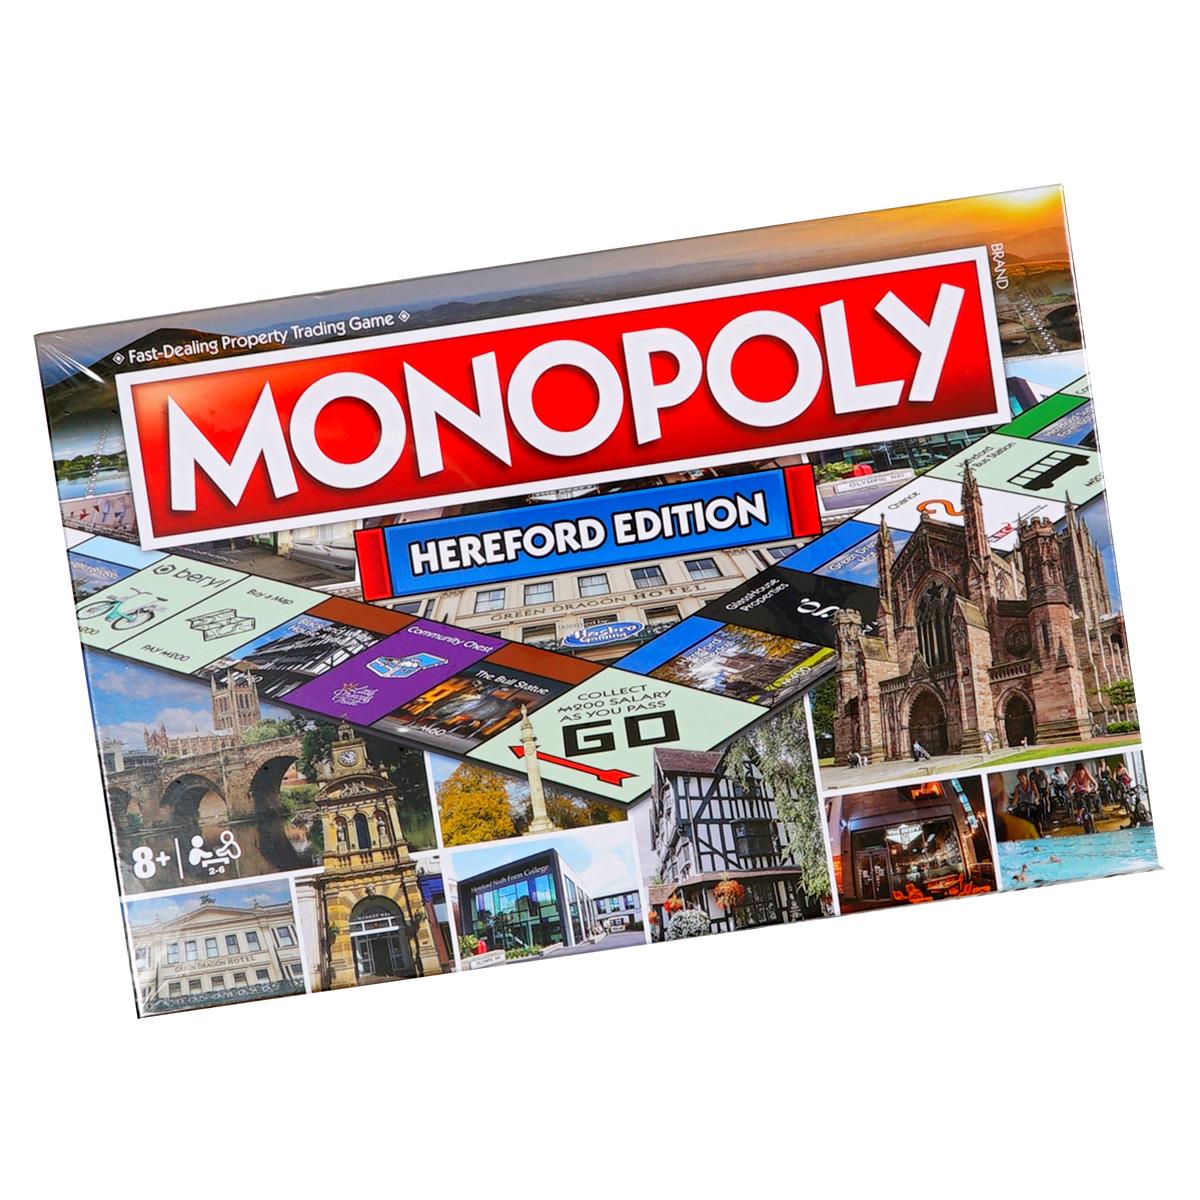 What delights await players in the Hereford Monopoly game?